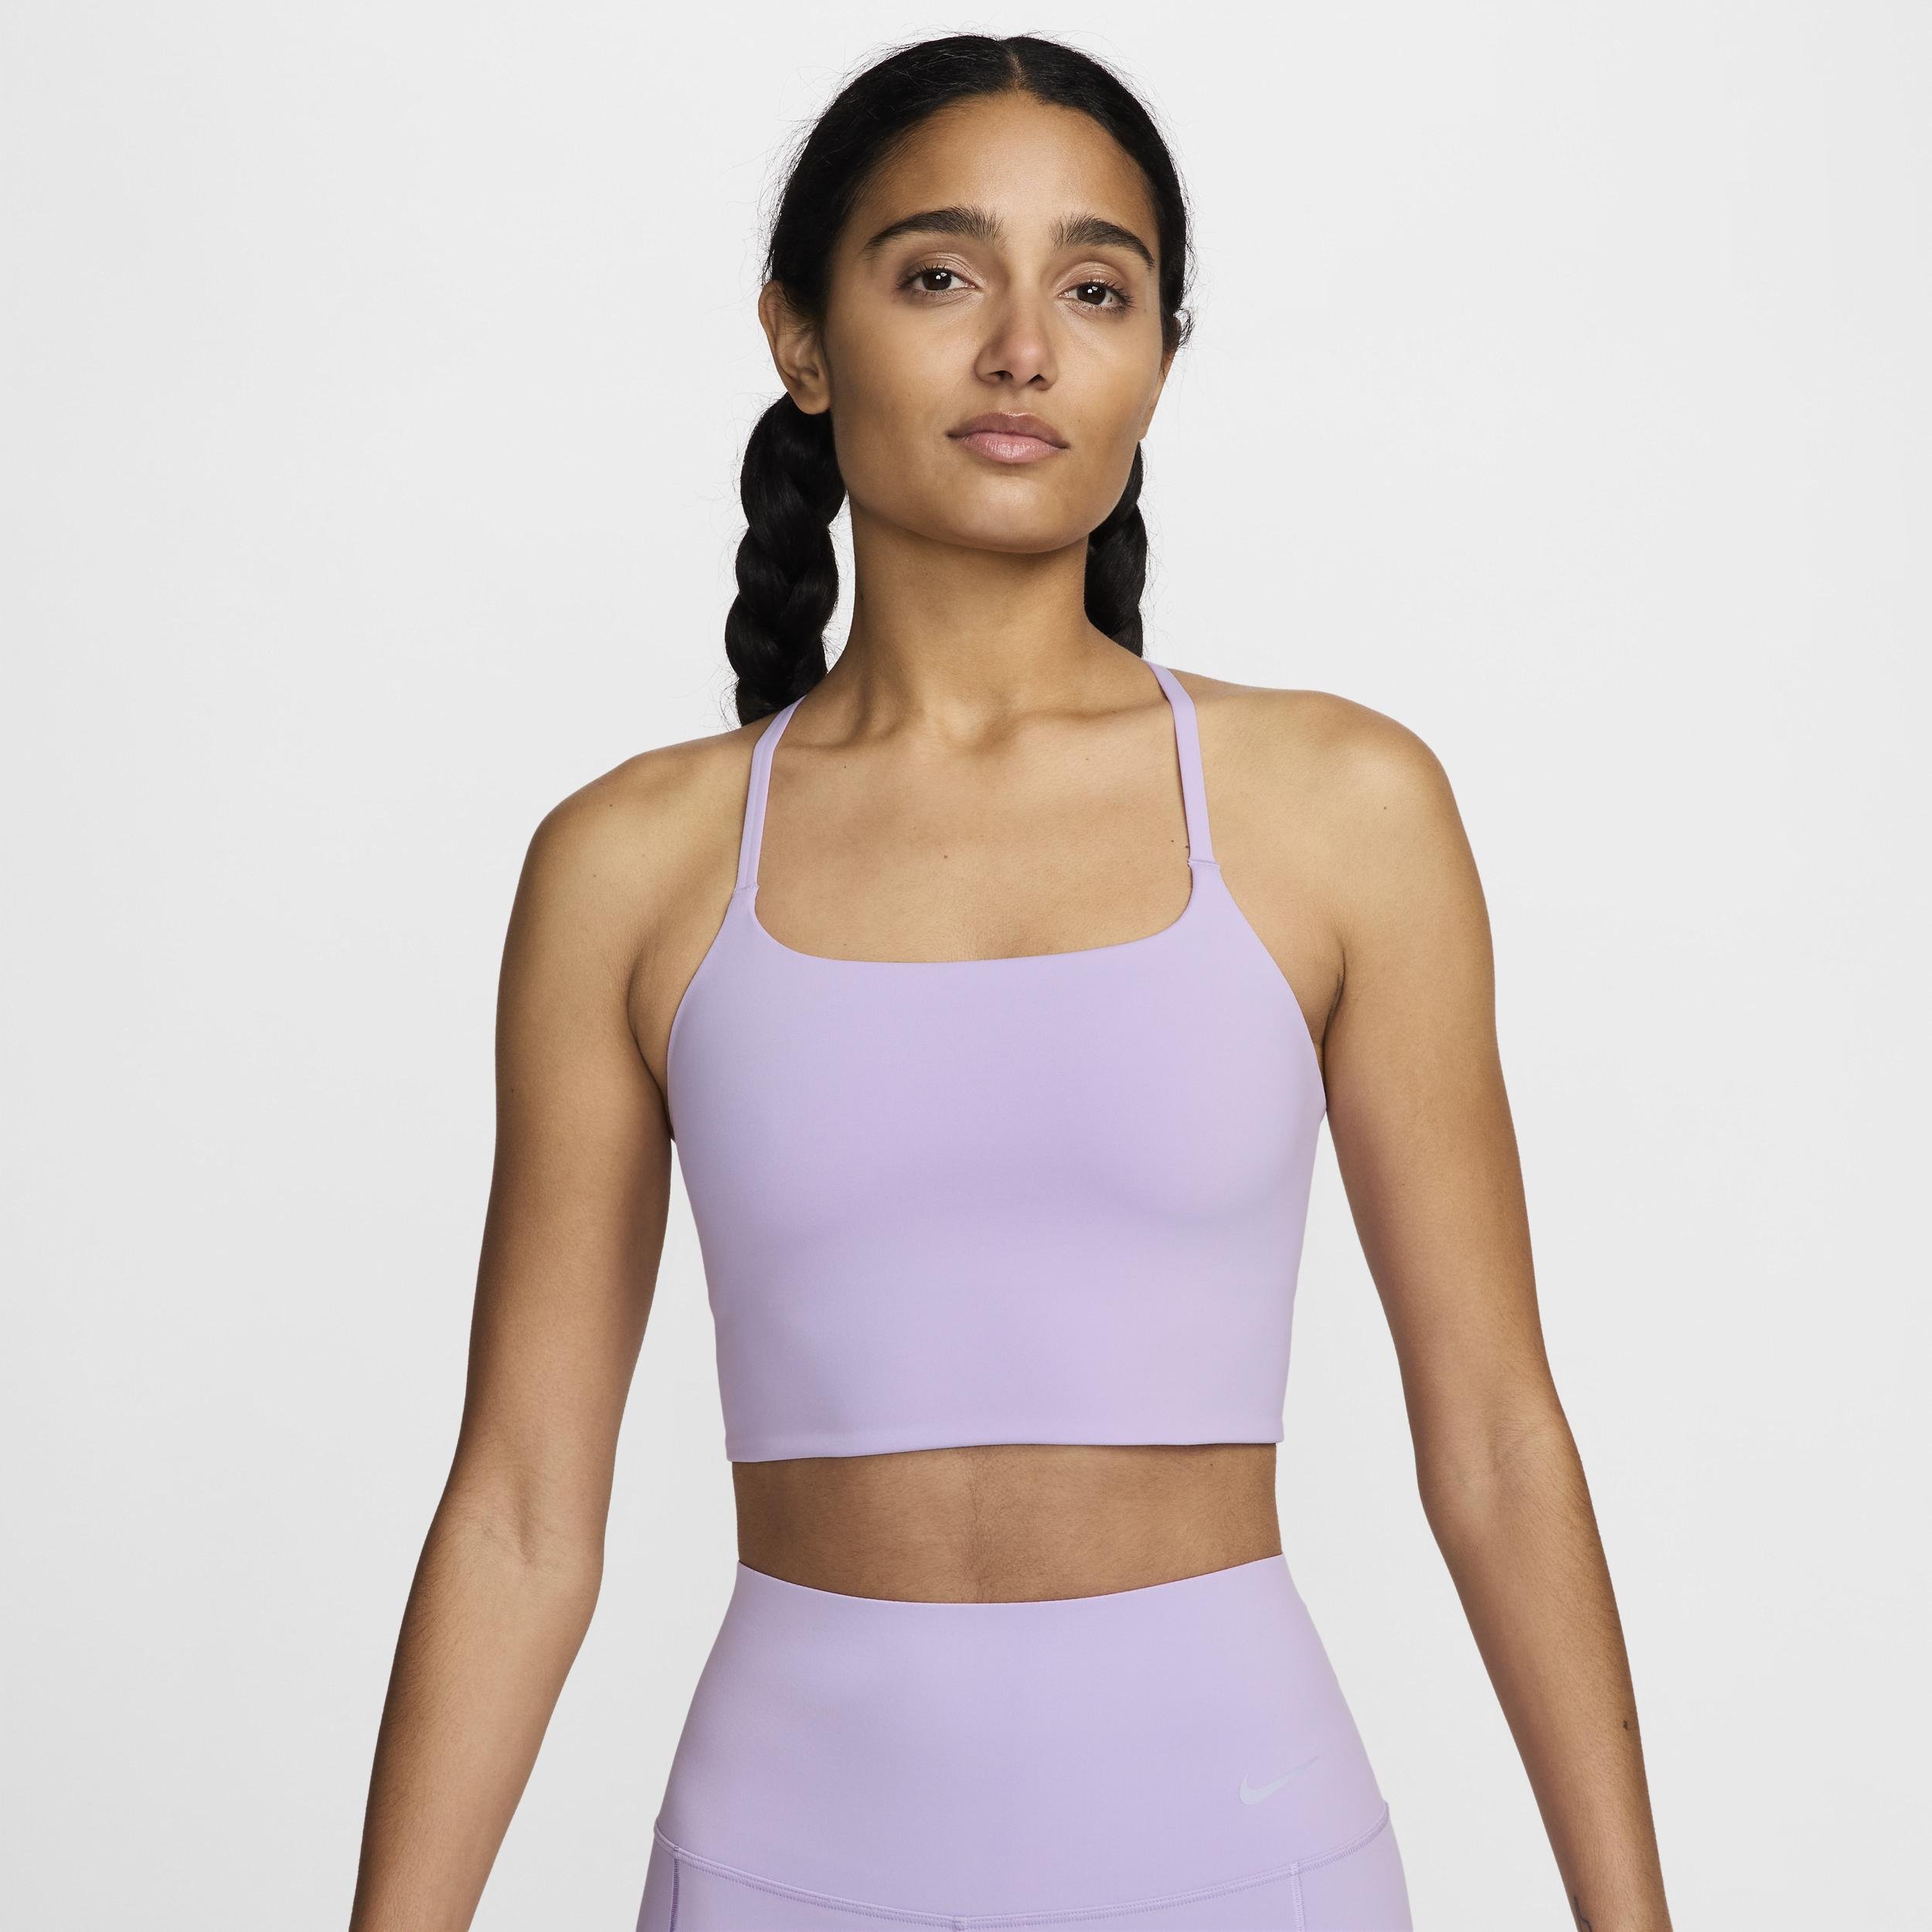 Nike Women's One Convertible Light-Support Lightly Lined Longline Sports Bra by NIKE